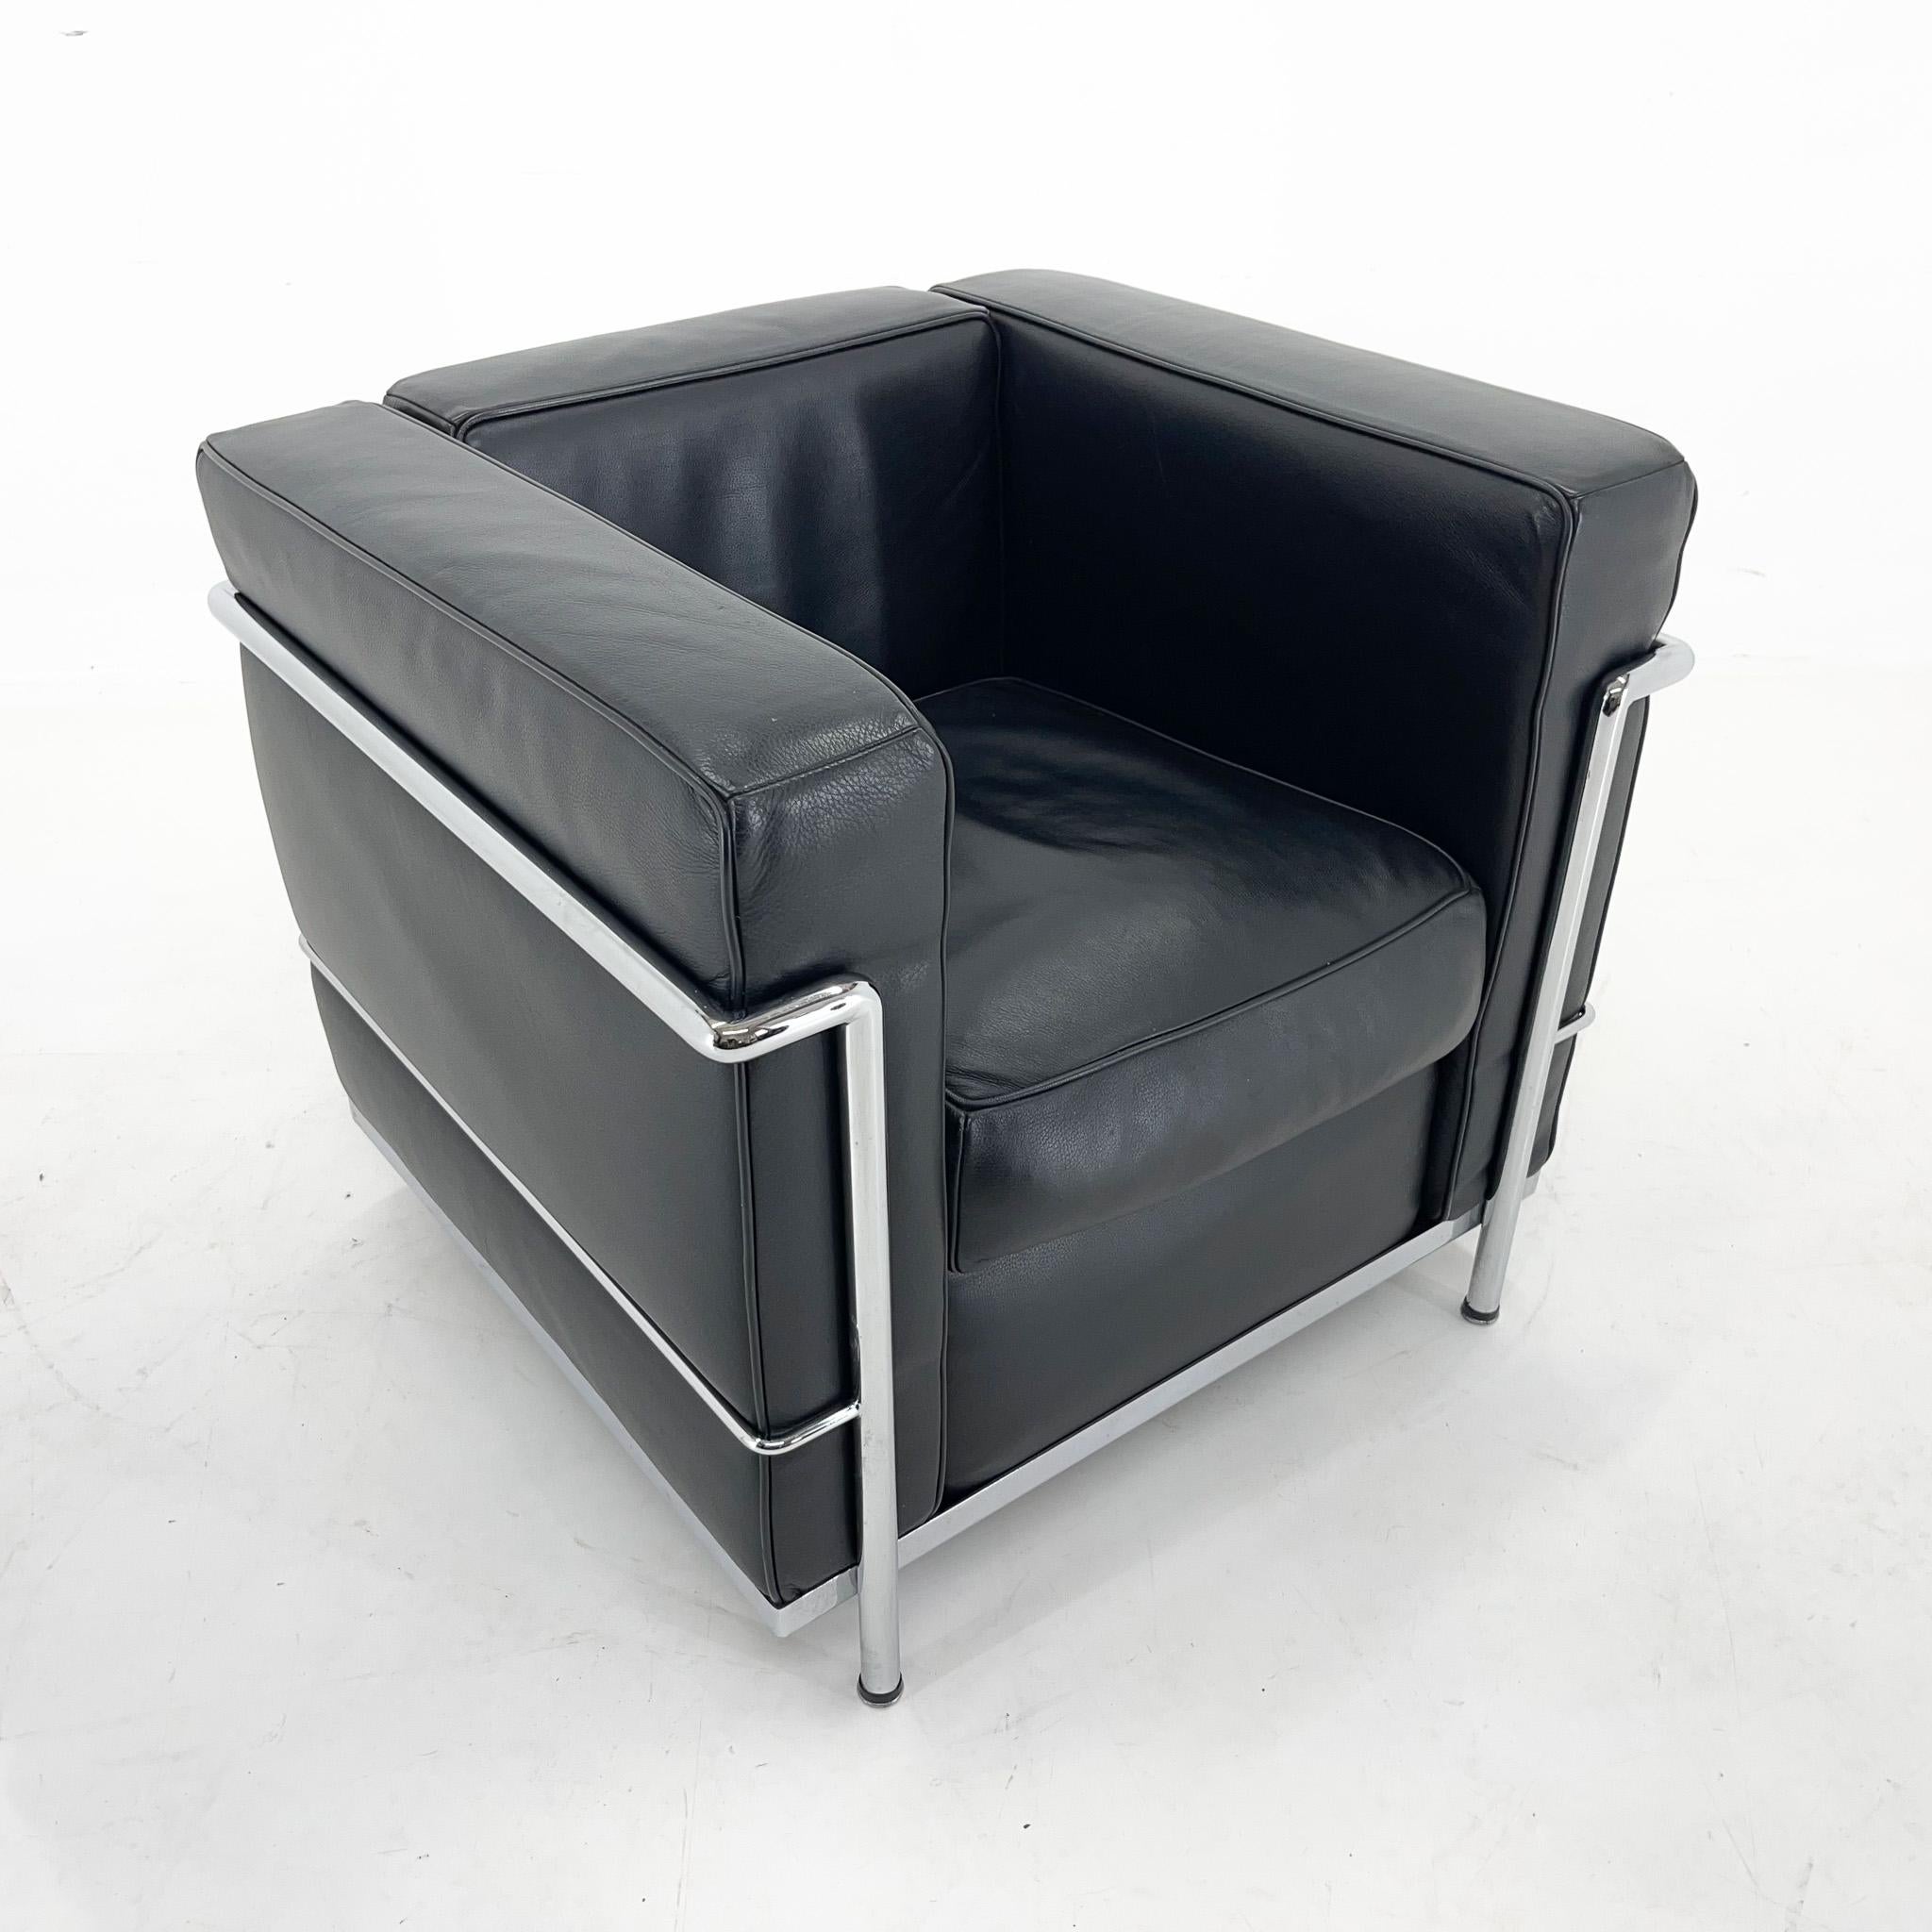 Armchair in black leather and chrome, made at the end of the 20th century. Based on the LC3 sofa designed by Le Corbusier, Pierre Jeanneret and Charlotte Perriand for Cassina. A fantastic combination of comfort and modern elegance.